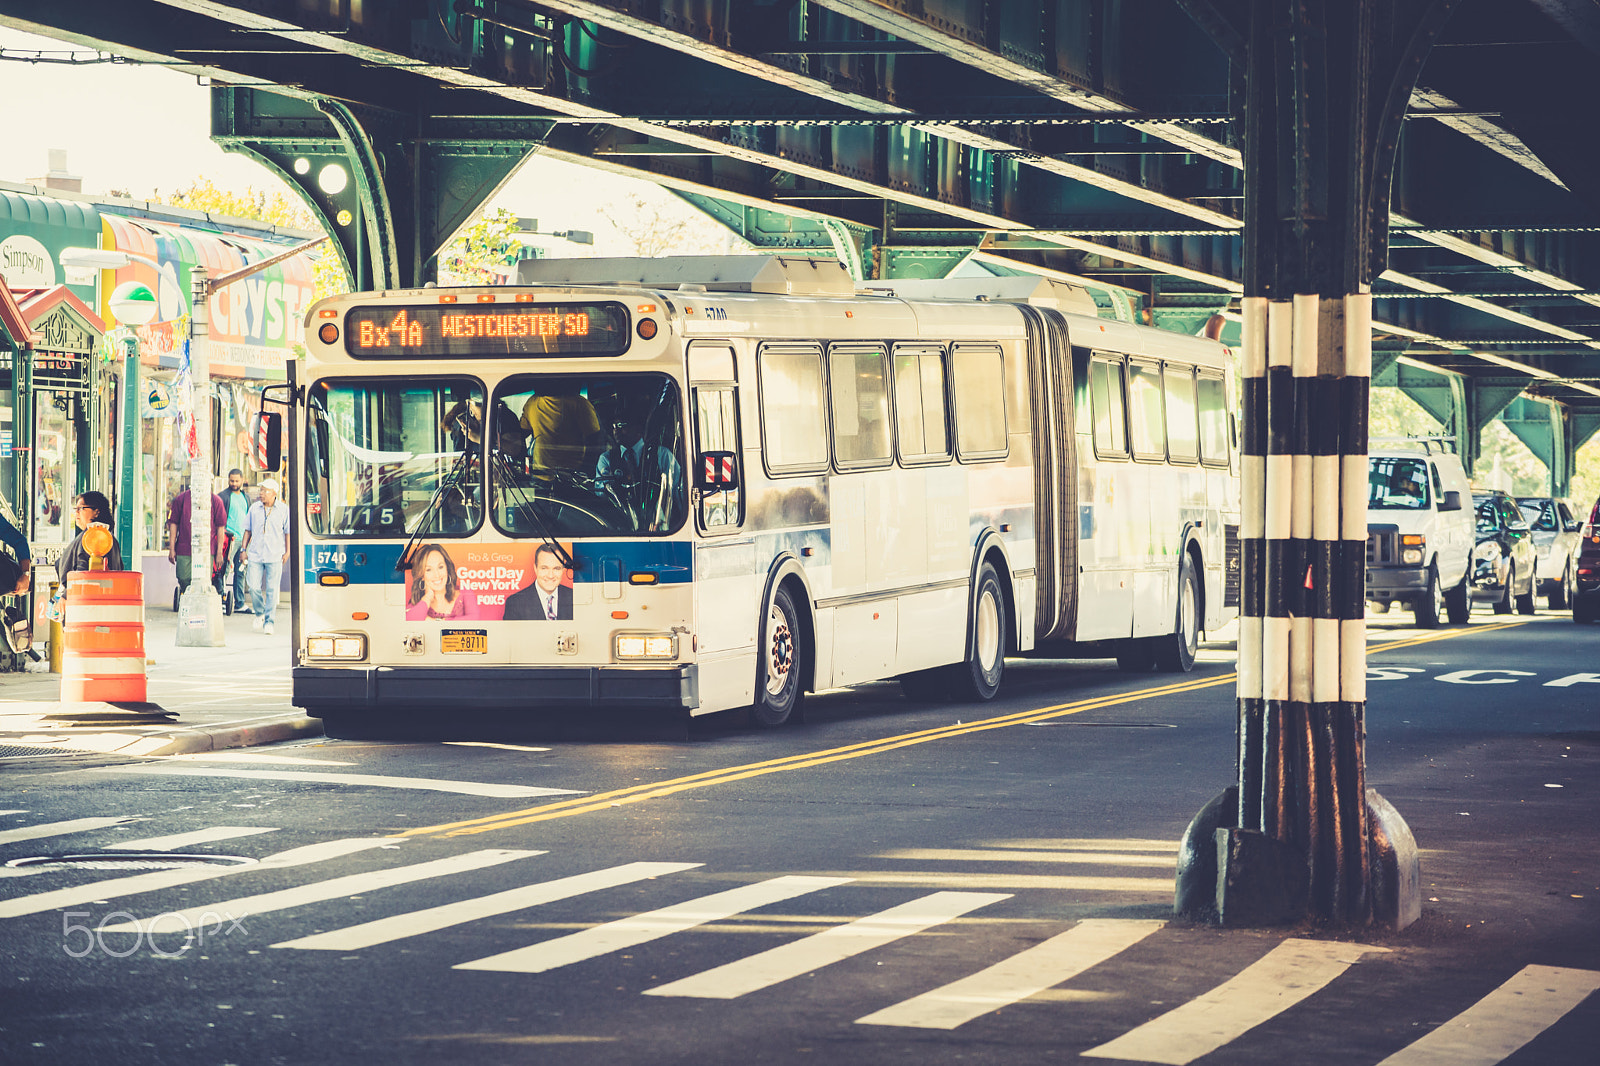 Sony a7 II sample photo. A bus is on route in bronx photography